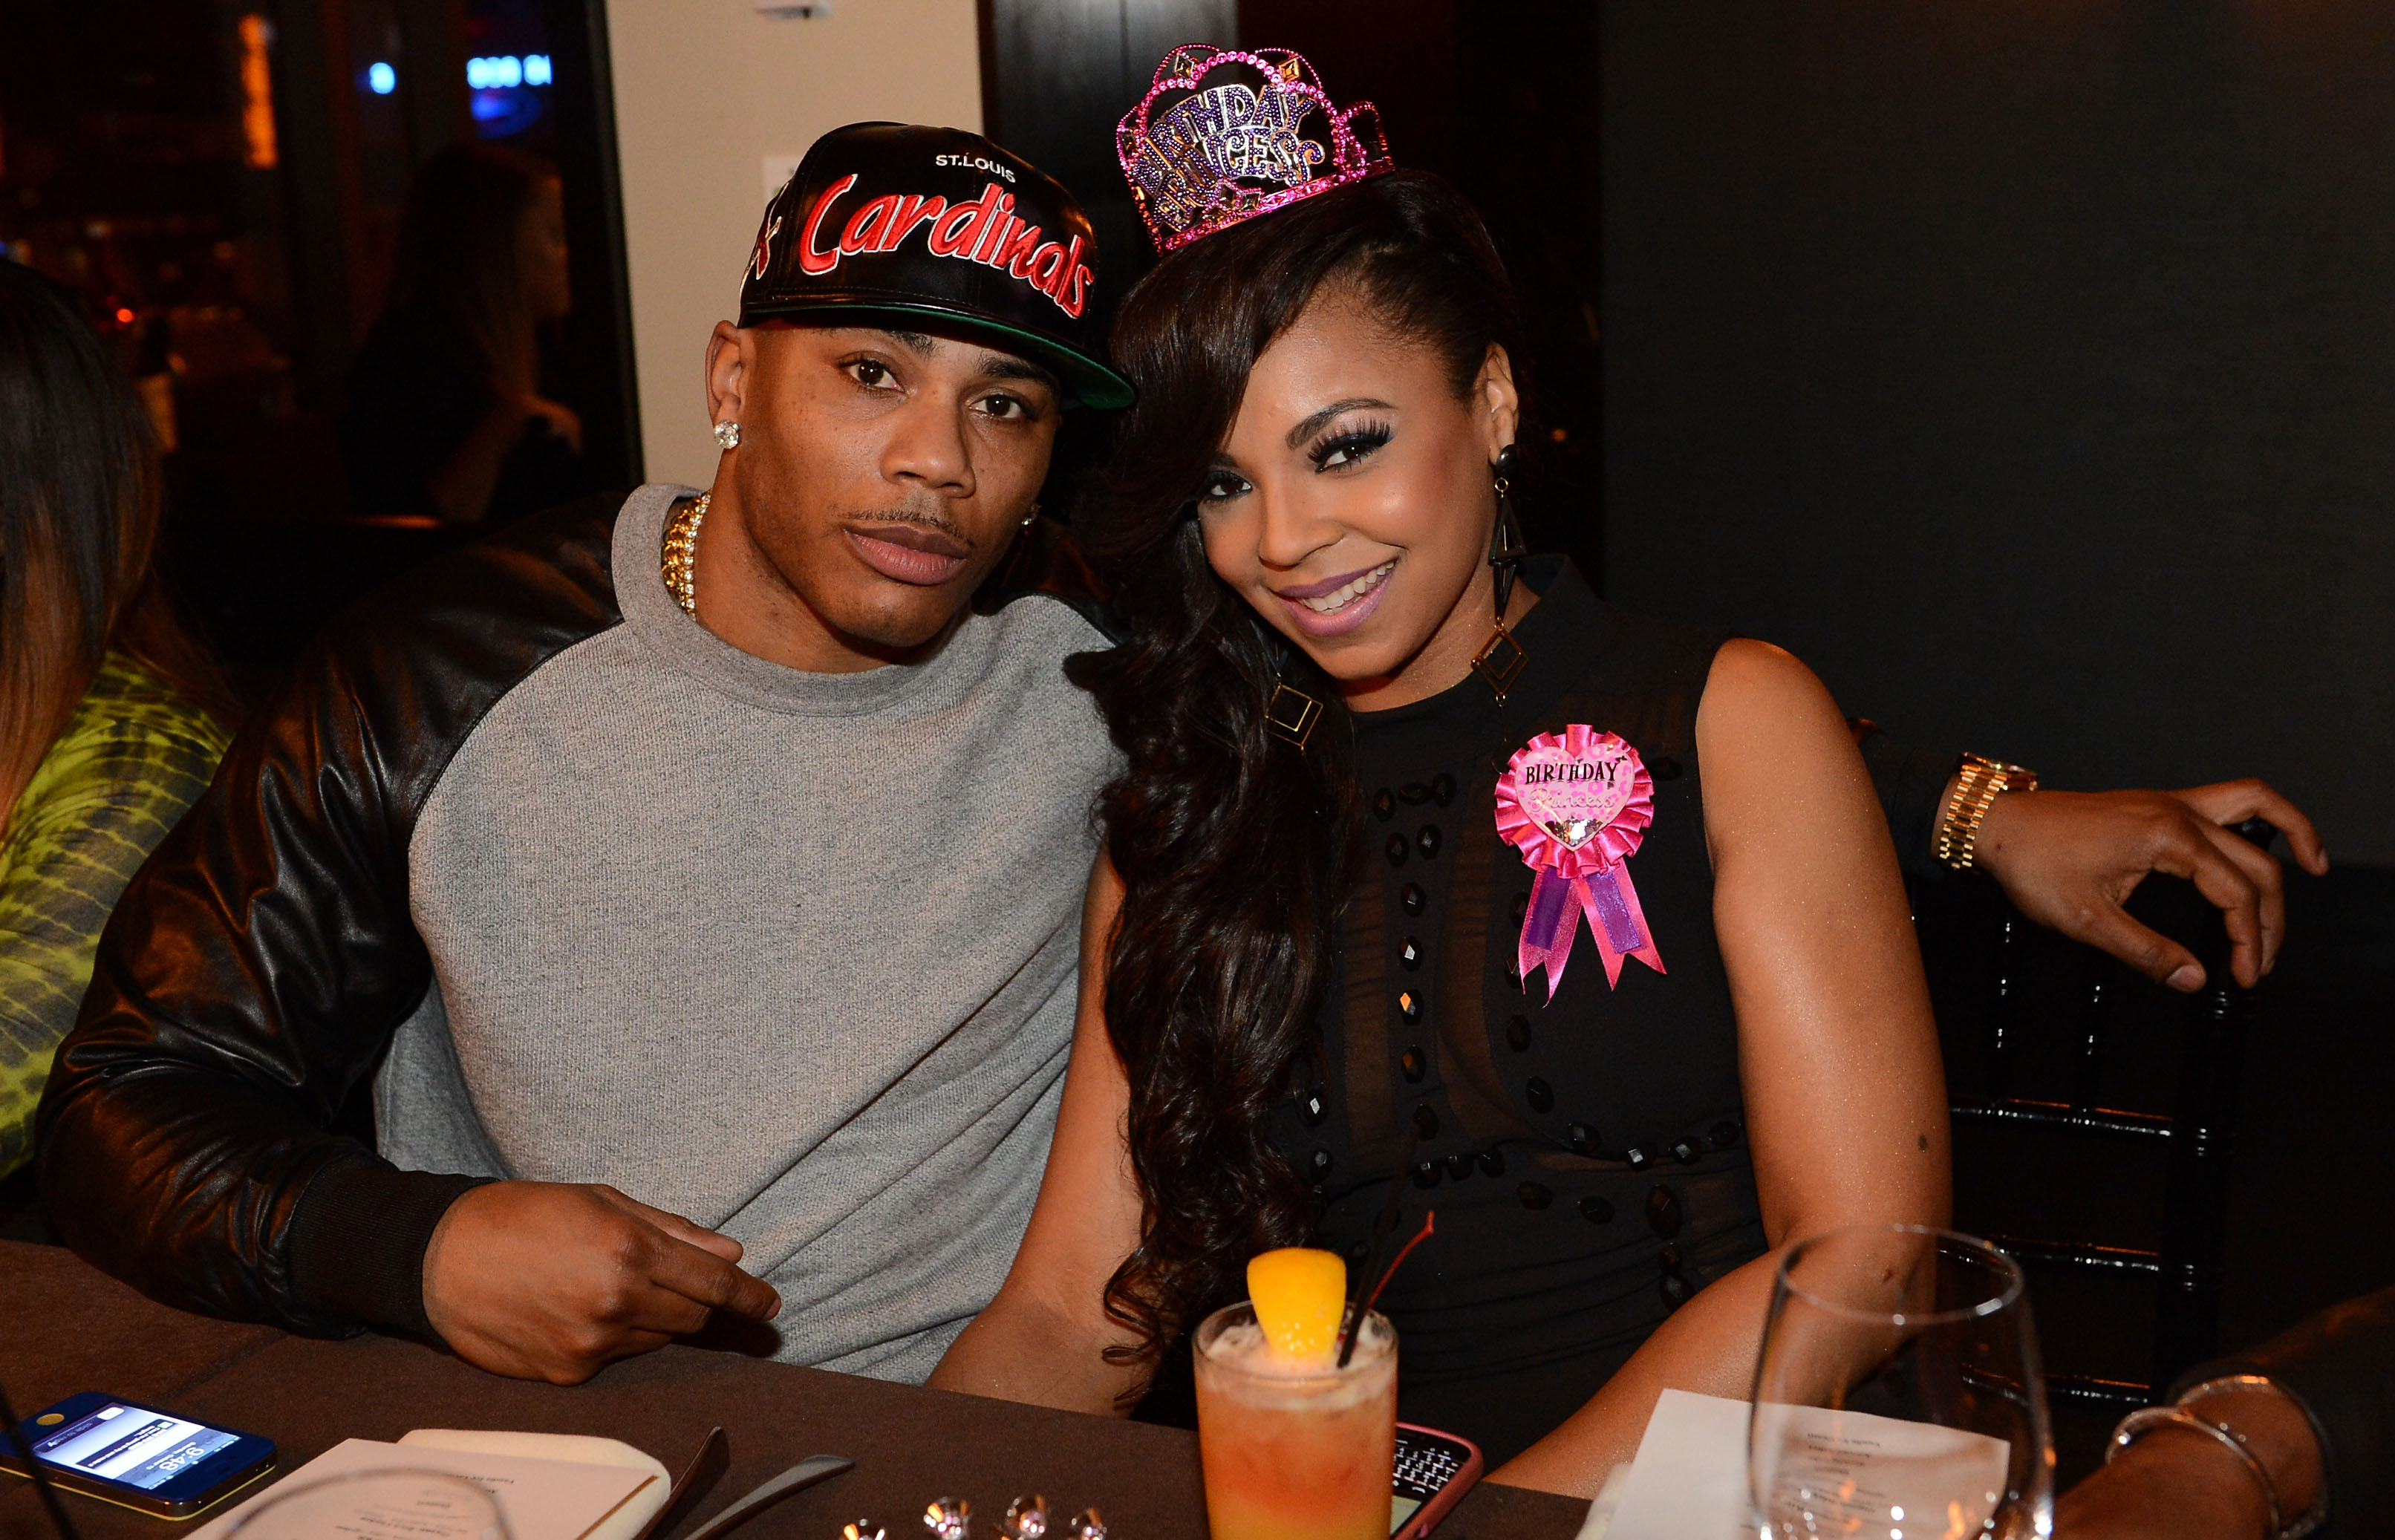 Nelly and Ashanti celebrating the singer's birthday on October 13, 2012